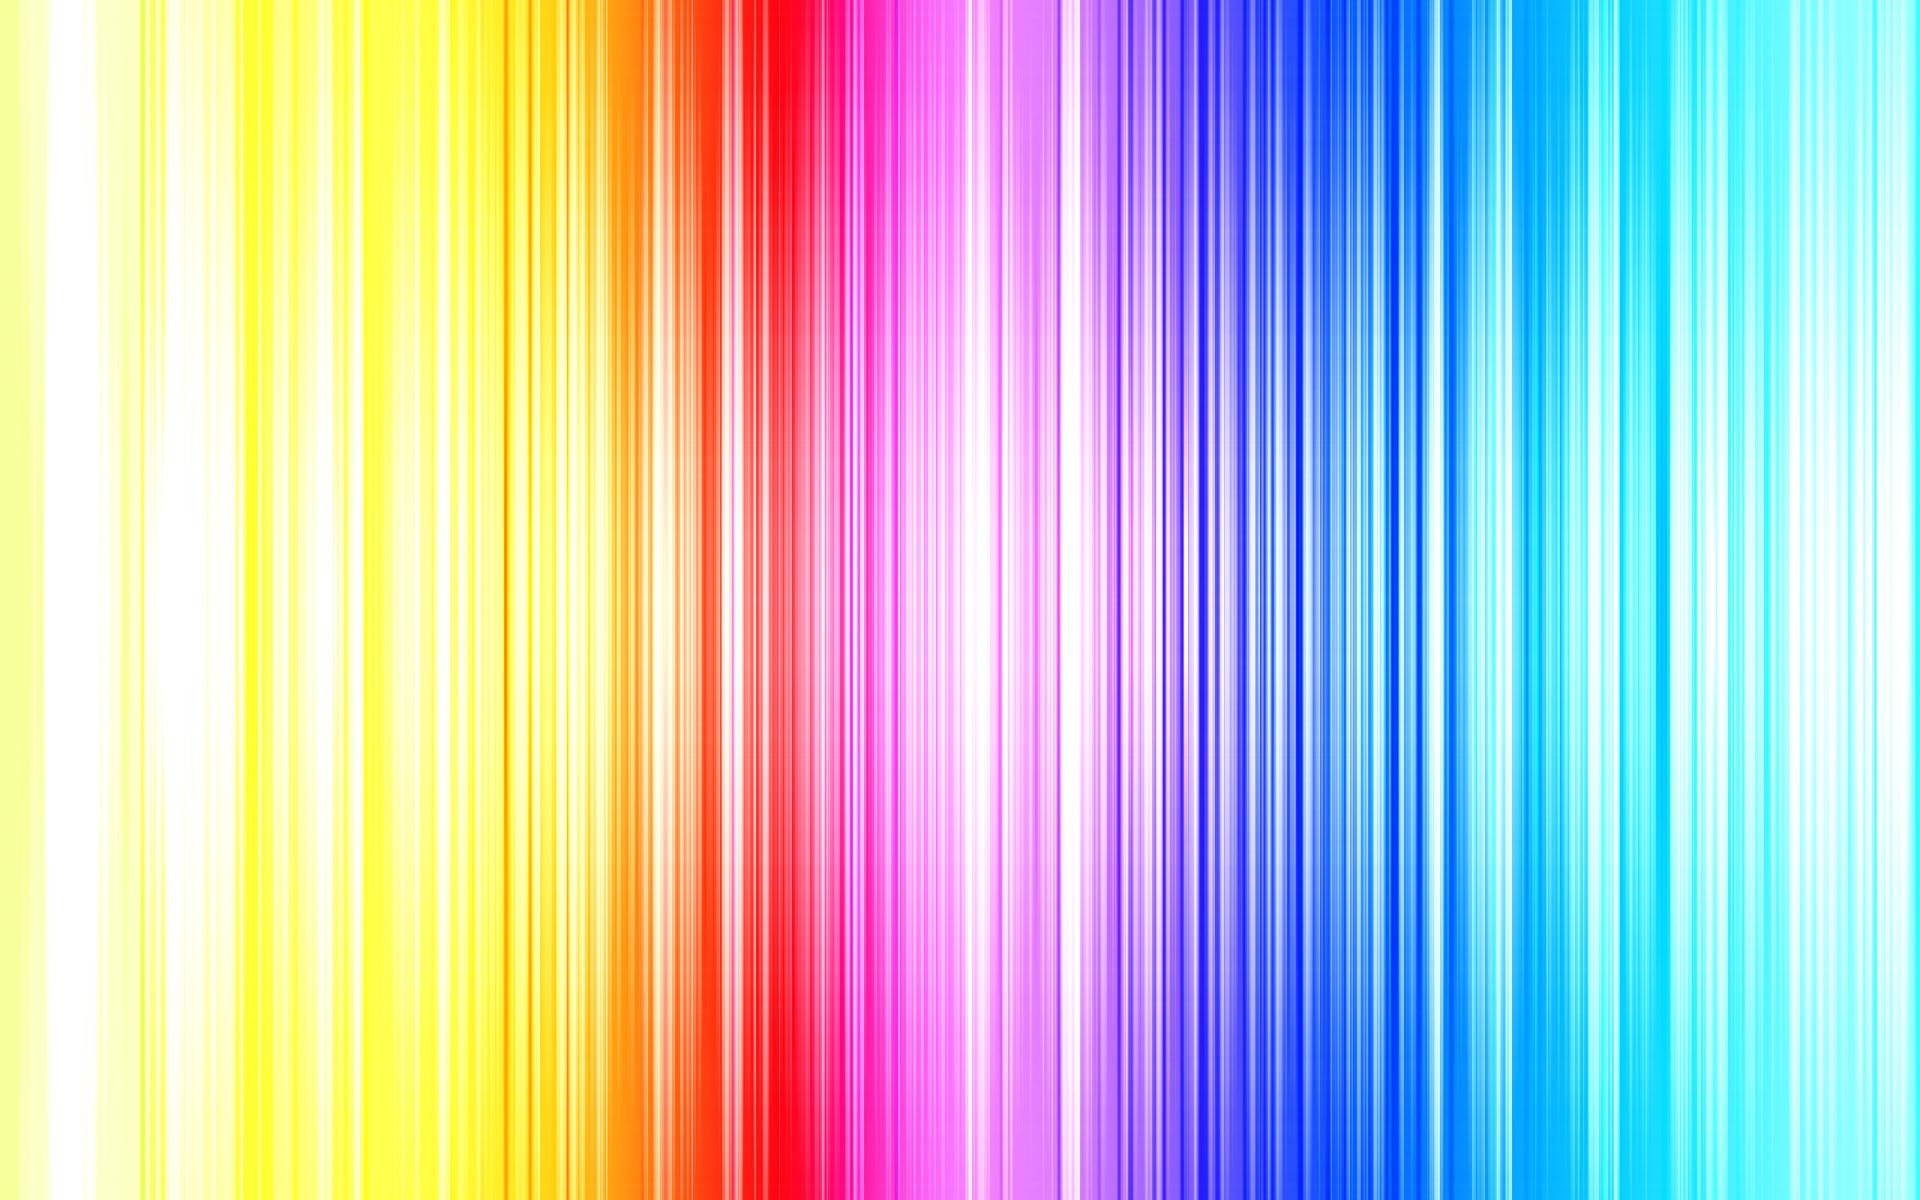 Colorful Background Designs 44 Images